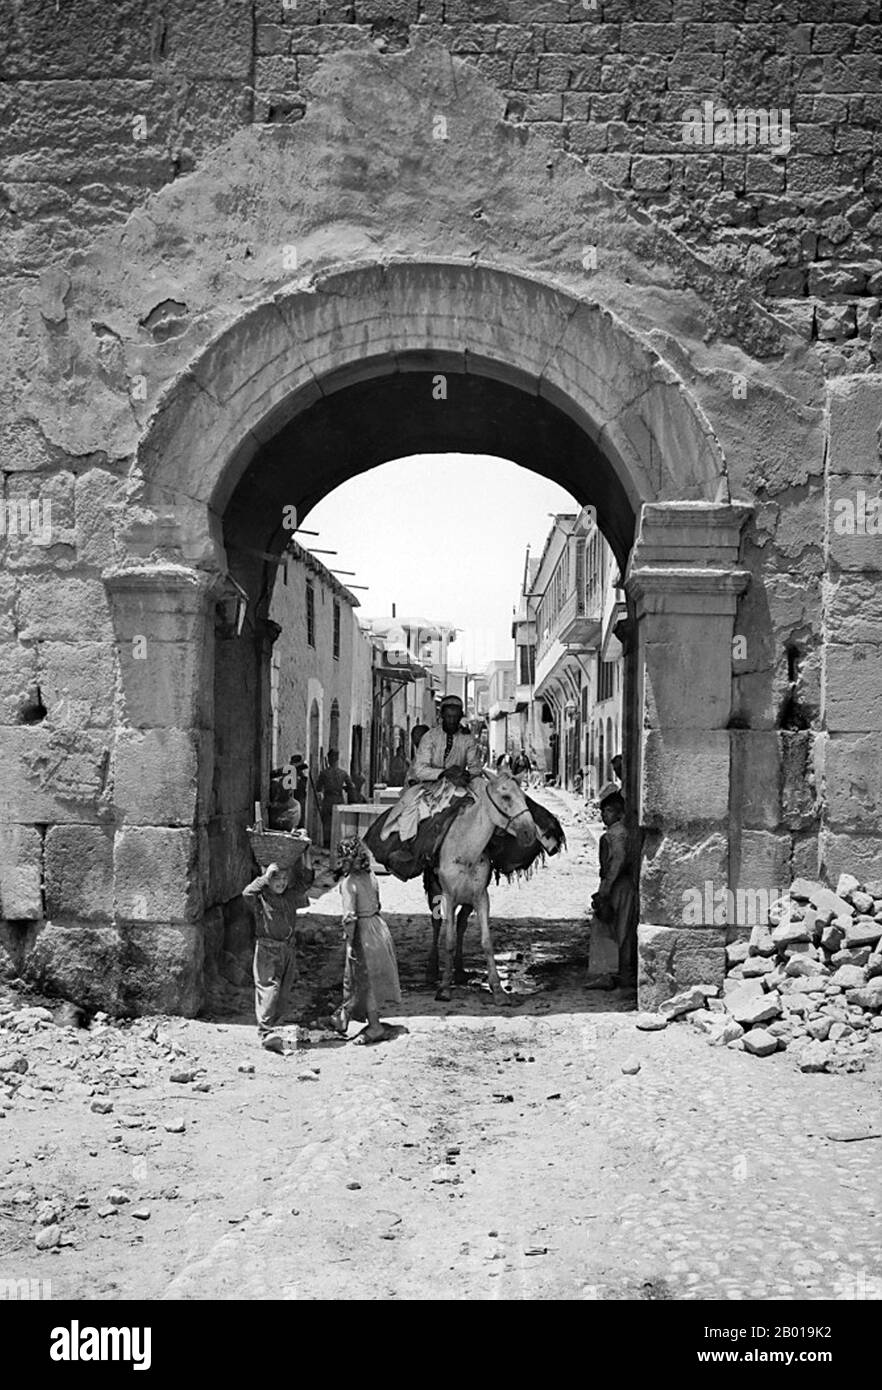 Syria: The East Gate of Damascus (Dimashq) and the 'Street Called Straight', c. 1950-1977 (out of copyright).  The Street Called Straight (Latin: Via Recta, Arabic: Al-Shāri` al-Mustaqīm), is the Roman street (Decumanus Maximus) that runs from east to west in the old city of Damascus. It was visited by St. Paul as recorded in the Acts of the Apostles, the fifth book of the Christian New Testament, and contains several interesting sights from the Roman, Christian and Islamic periods. The east end of Straight Street is at Bab al-Sharqi, the Roman gate of the Sun. Stock Photo